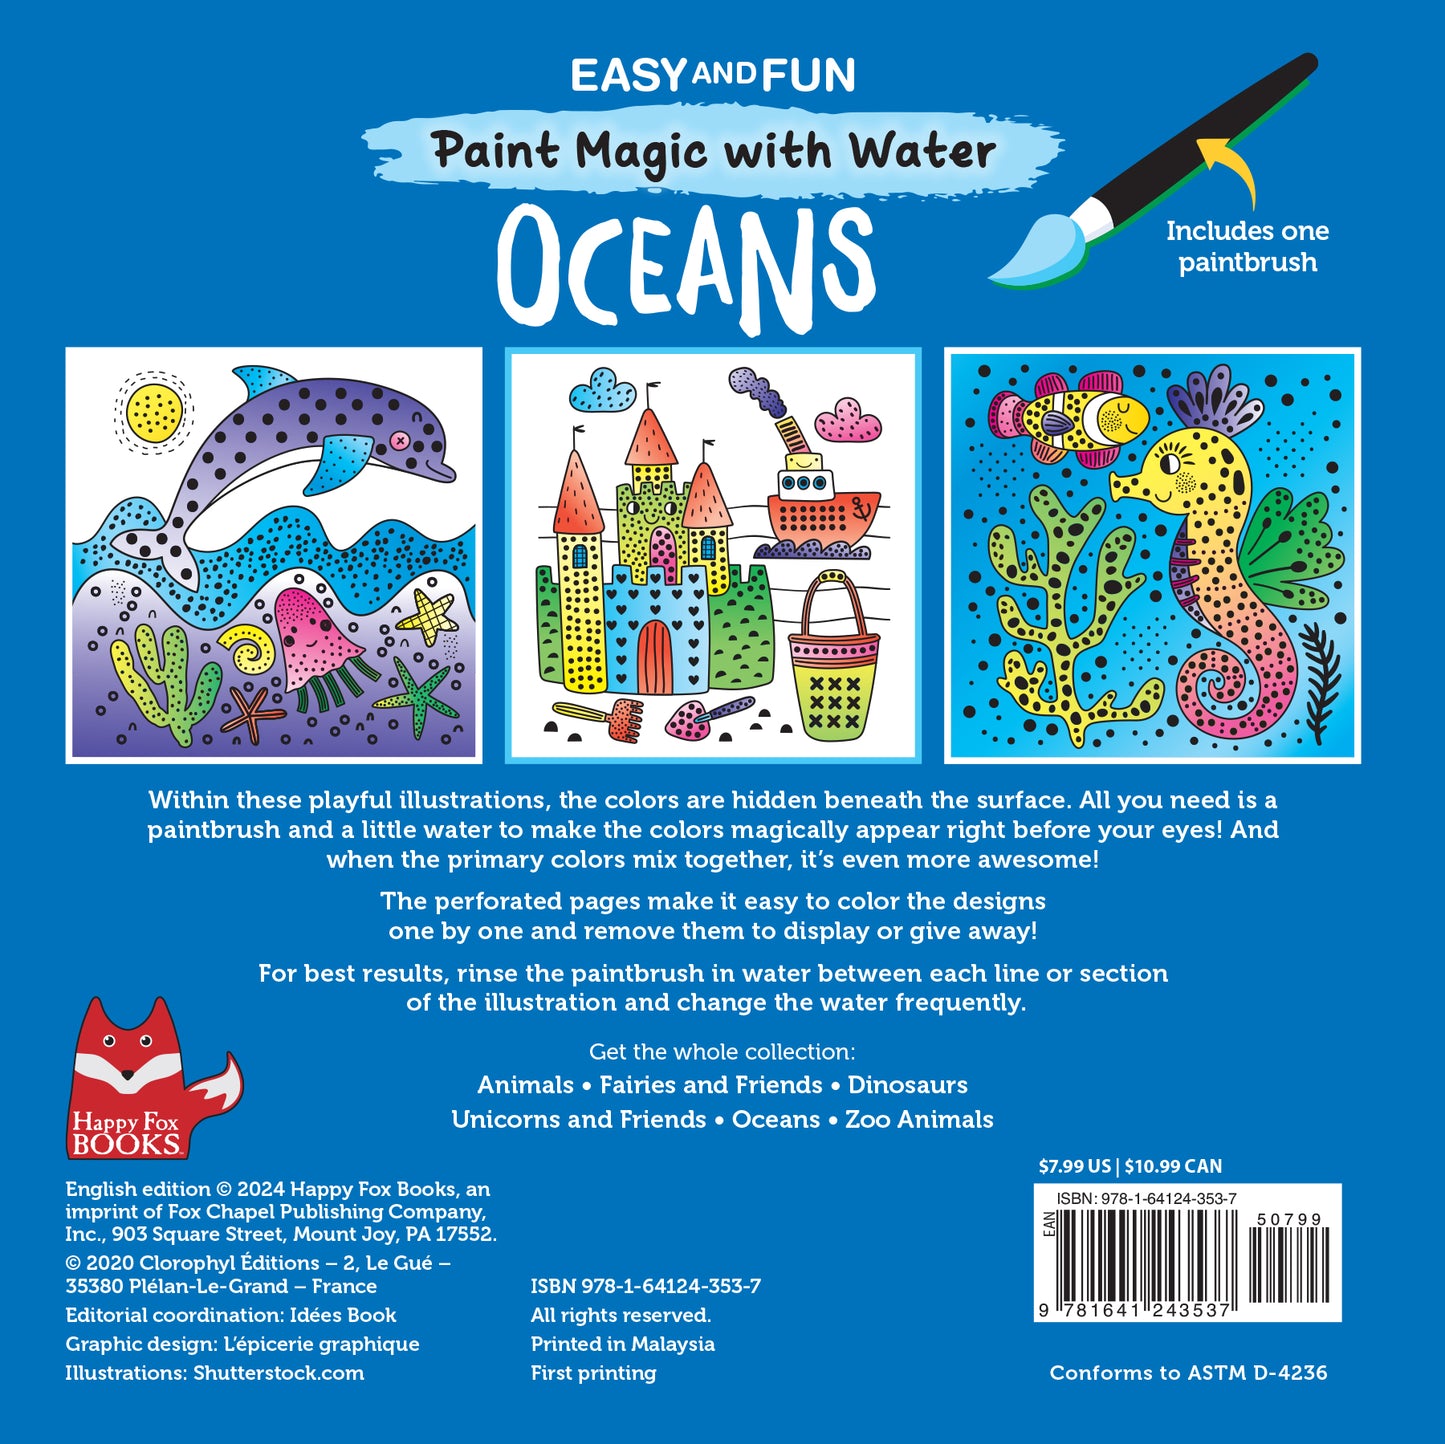 Easy and Fun Paint Magic with Water: Oceans